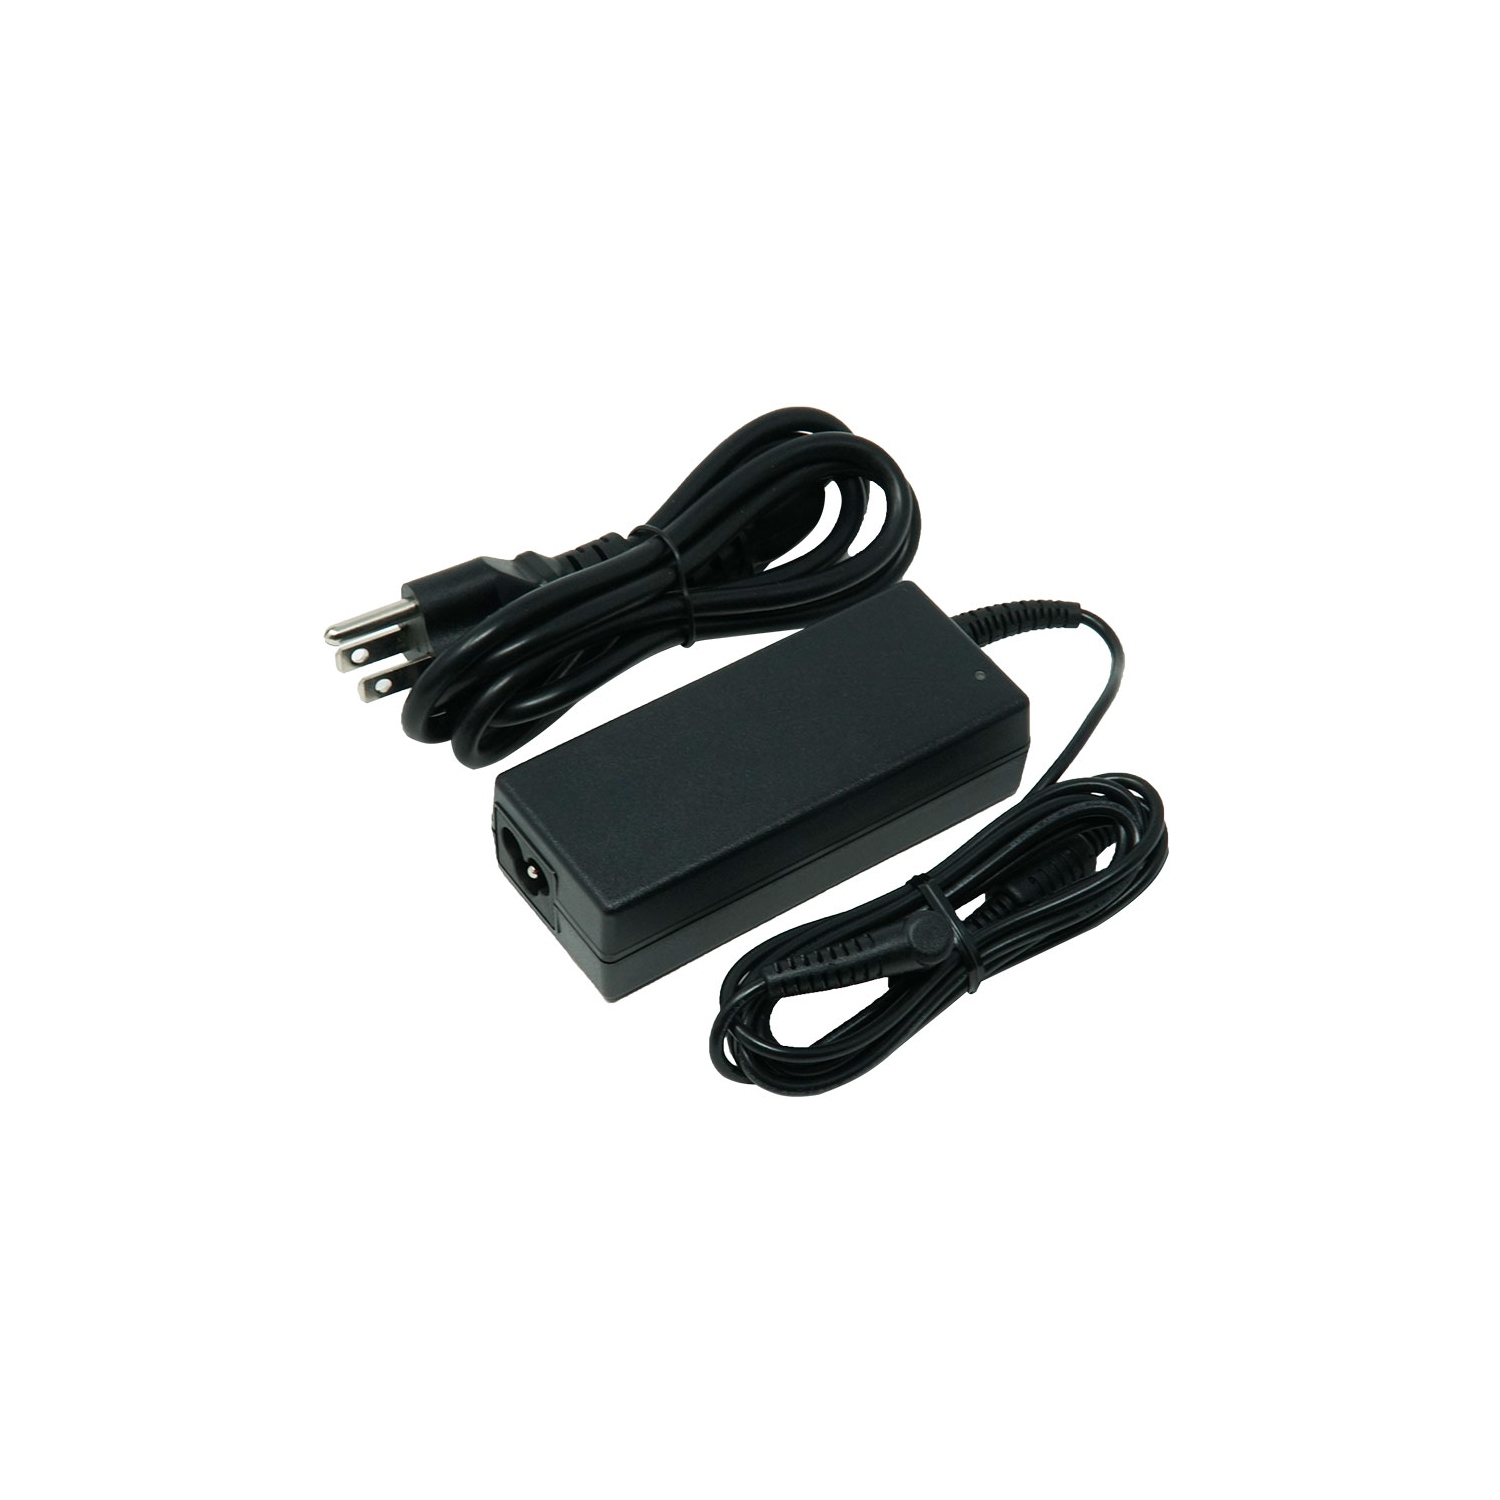 Dr. Battery - Notebook Adapter for Fujitsu LifeBook LH532 / 6500589 / 6500722 / 6500723 / 6500731 - Free Shipping